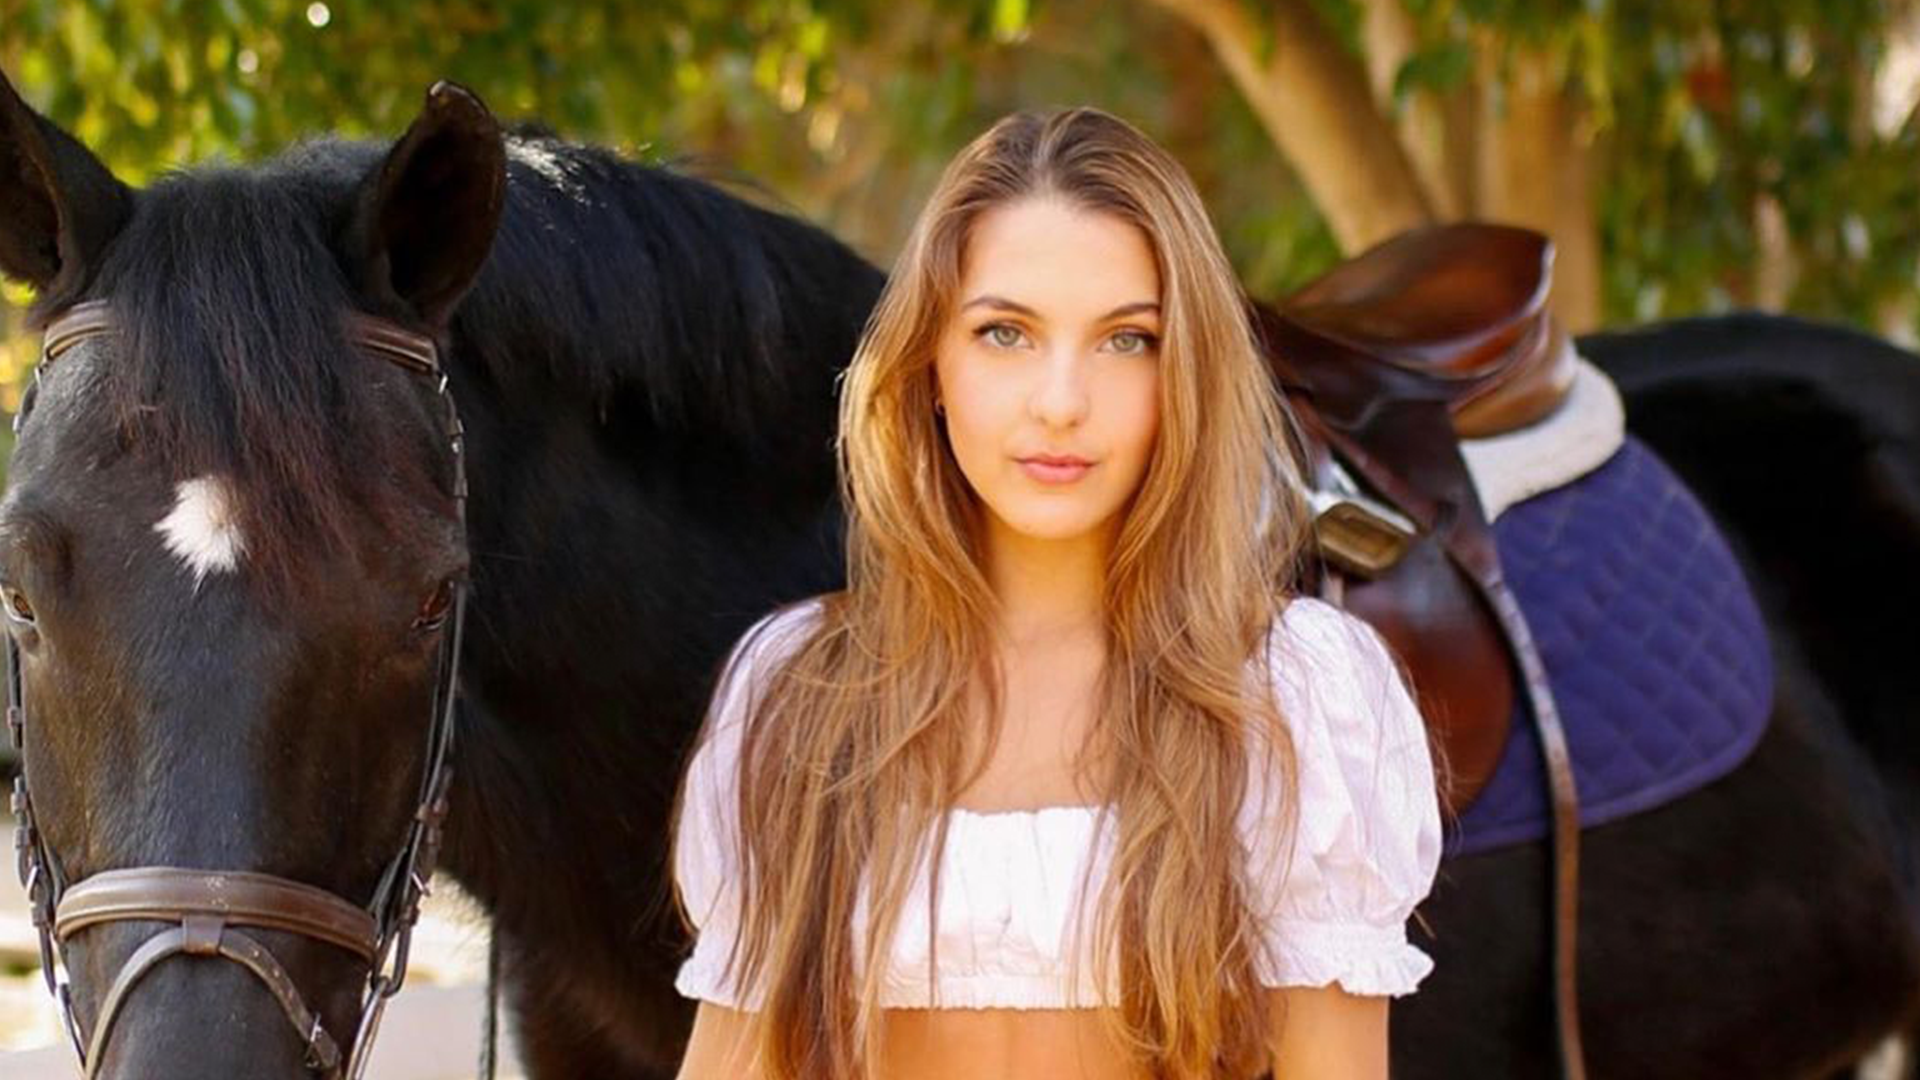 Lexi with a horse